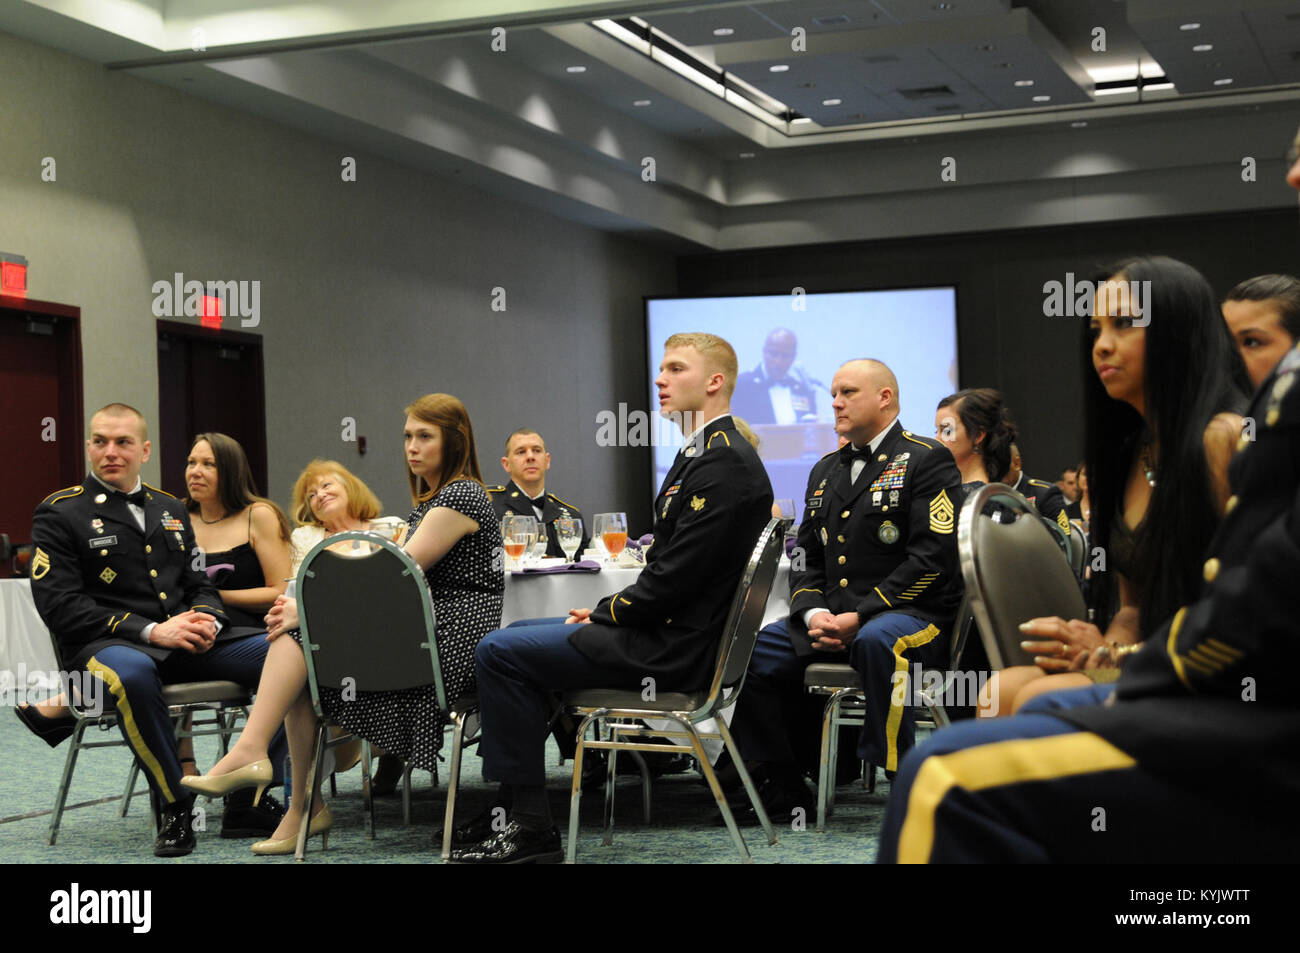 The Kentucky Army National Guard's Soldier, NCO and Senior NCO of 2015, along with their guests, listen to Sgt. Maj. Gary Smith's, 4th Marine Logistics command senior enlisted leader, remarks about leadership during the 2015 Outstanding Airman and Soldier of the Year Banquet March 14, 2015 at the Kentucky Fair and Exposition Center in Louisville, Kentucky. The annual awards dinner honors Kentucky's finest Airmen and Soldiers who are recognized by their peers for dedicating themselves to the welfare and security of our nation. (Photo by Sgt. 1st Class Gina Vaile-Nelson, 133 MPAD/KYARNG RELEASED Stock Photo